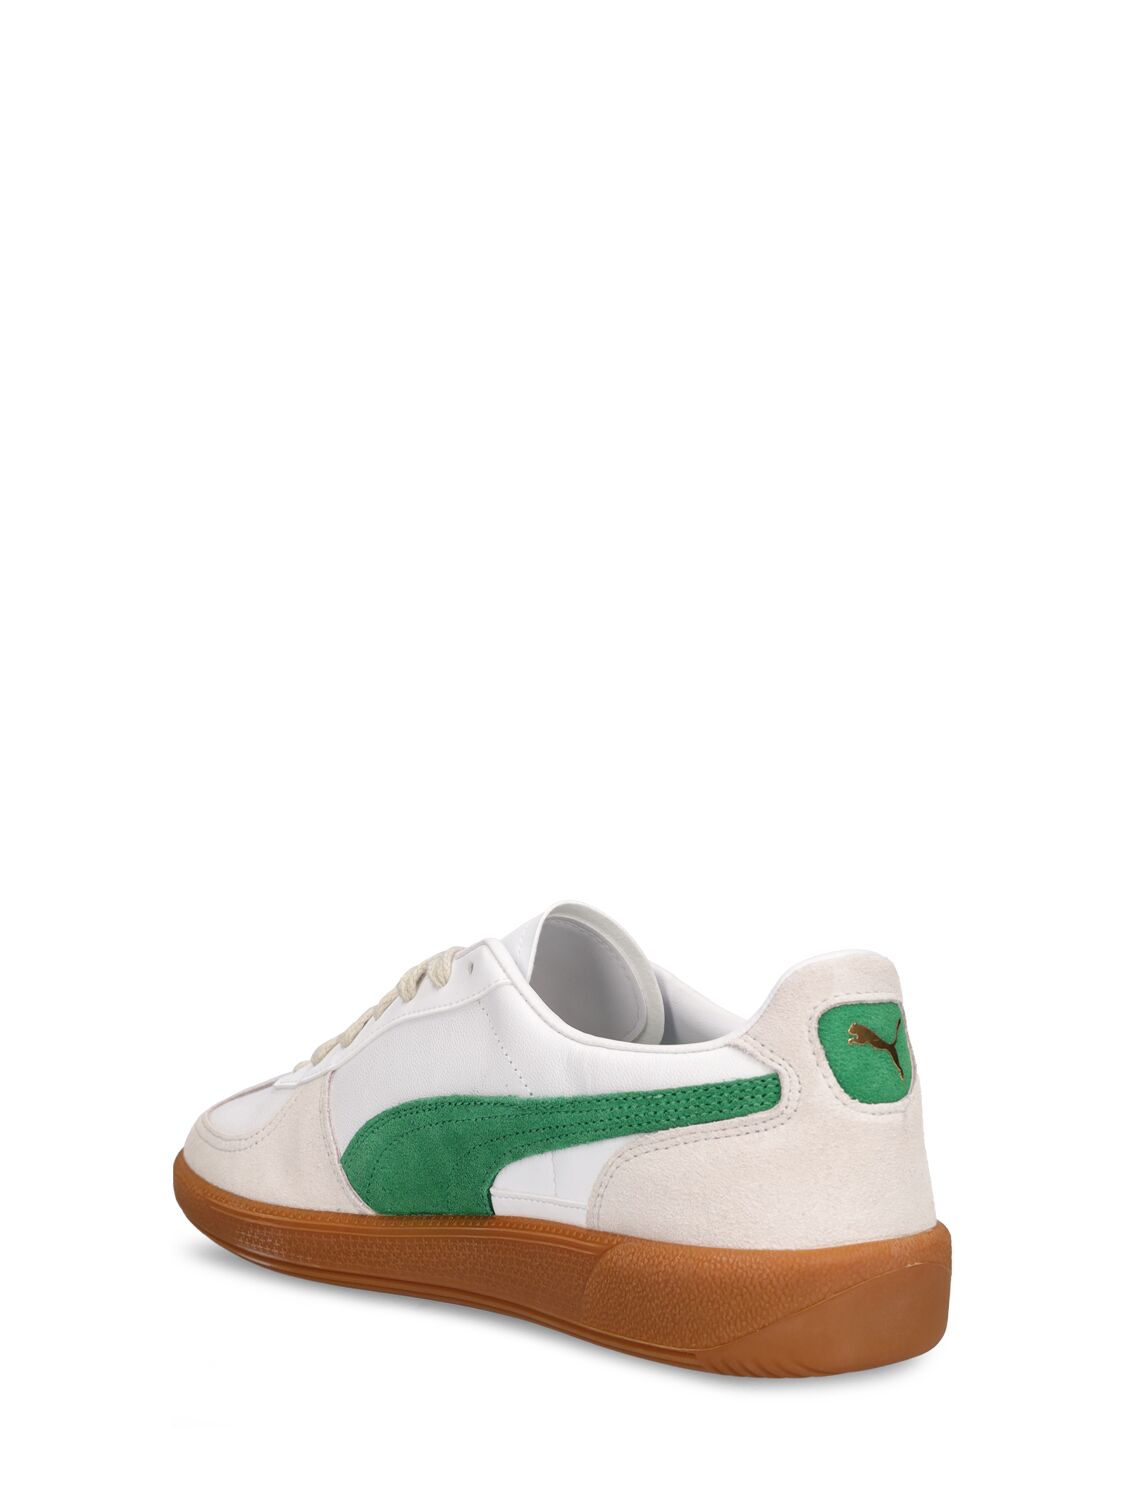 Shop Puma Palermo Sneakers In Archive Green